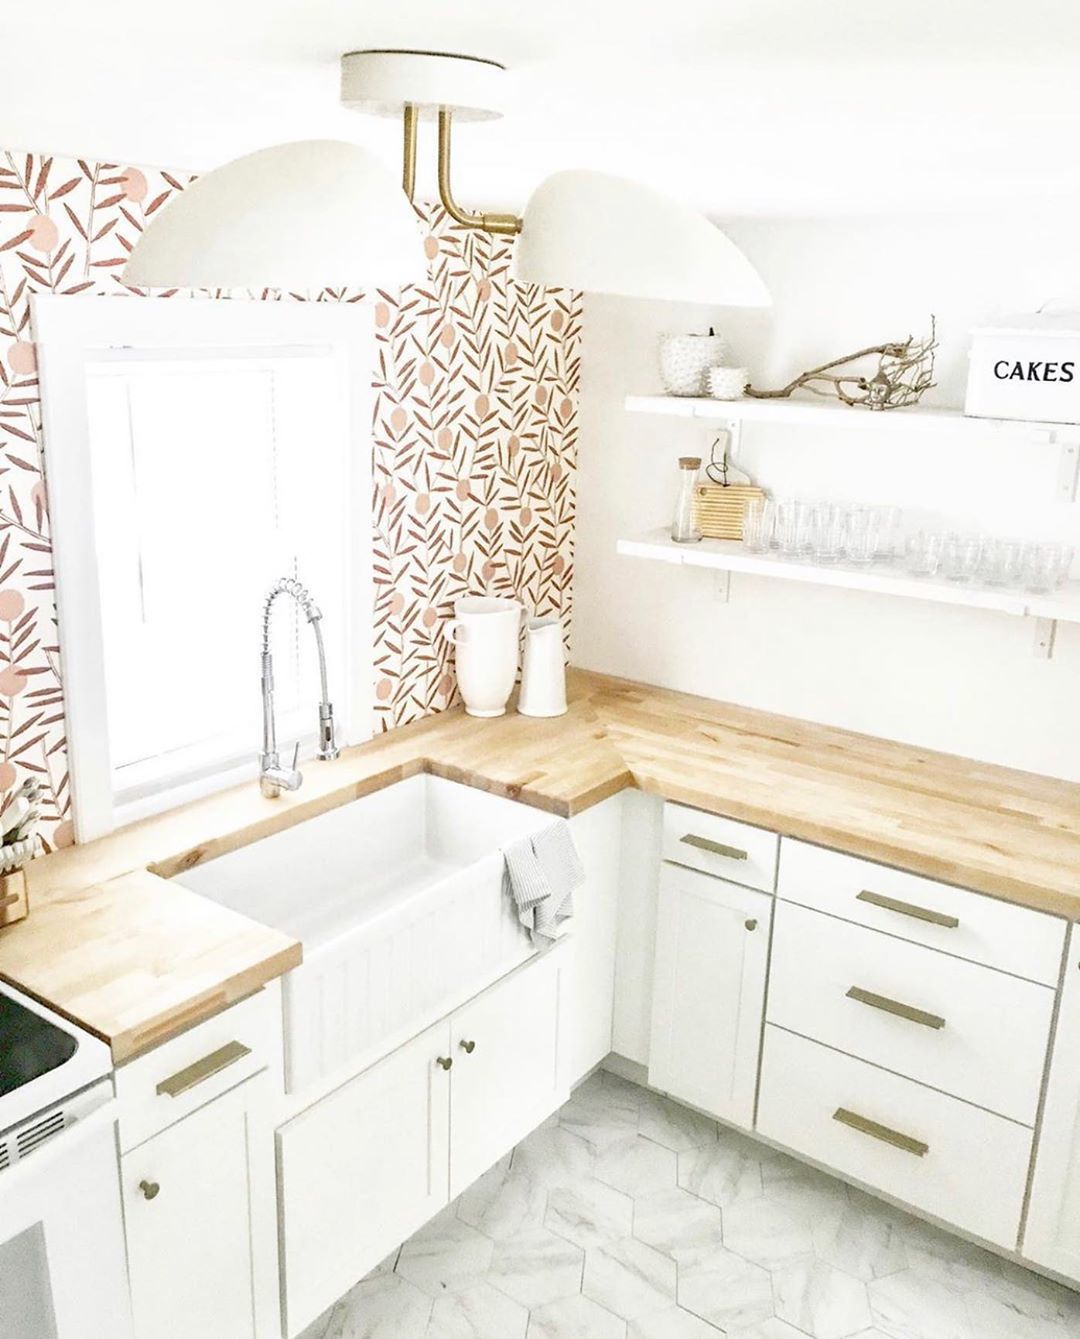 Our Favorite Patterns for the Kitchen | Bloom Dusty Rose wallpaper | Emily Isabella | Hygge & West